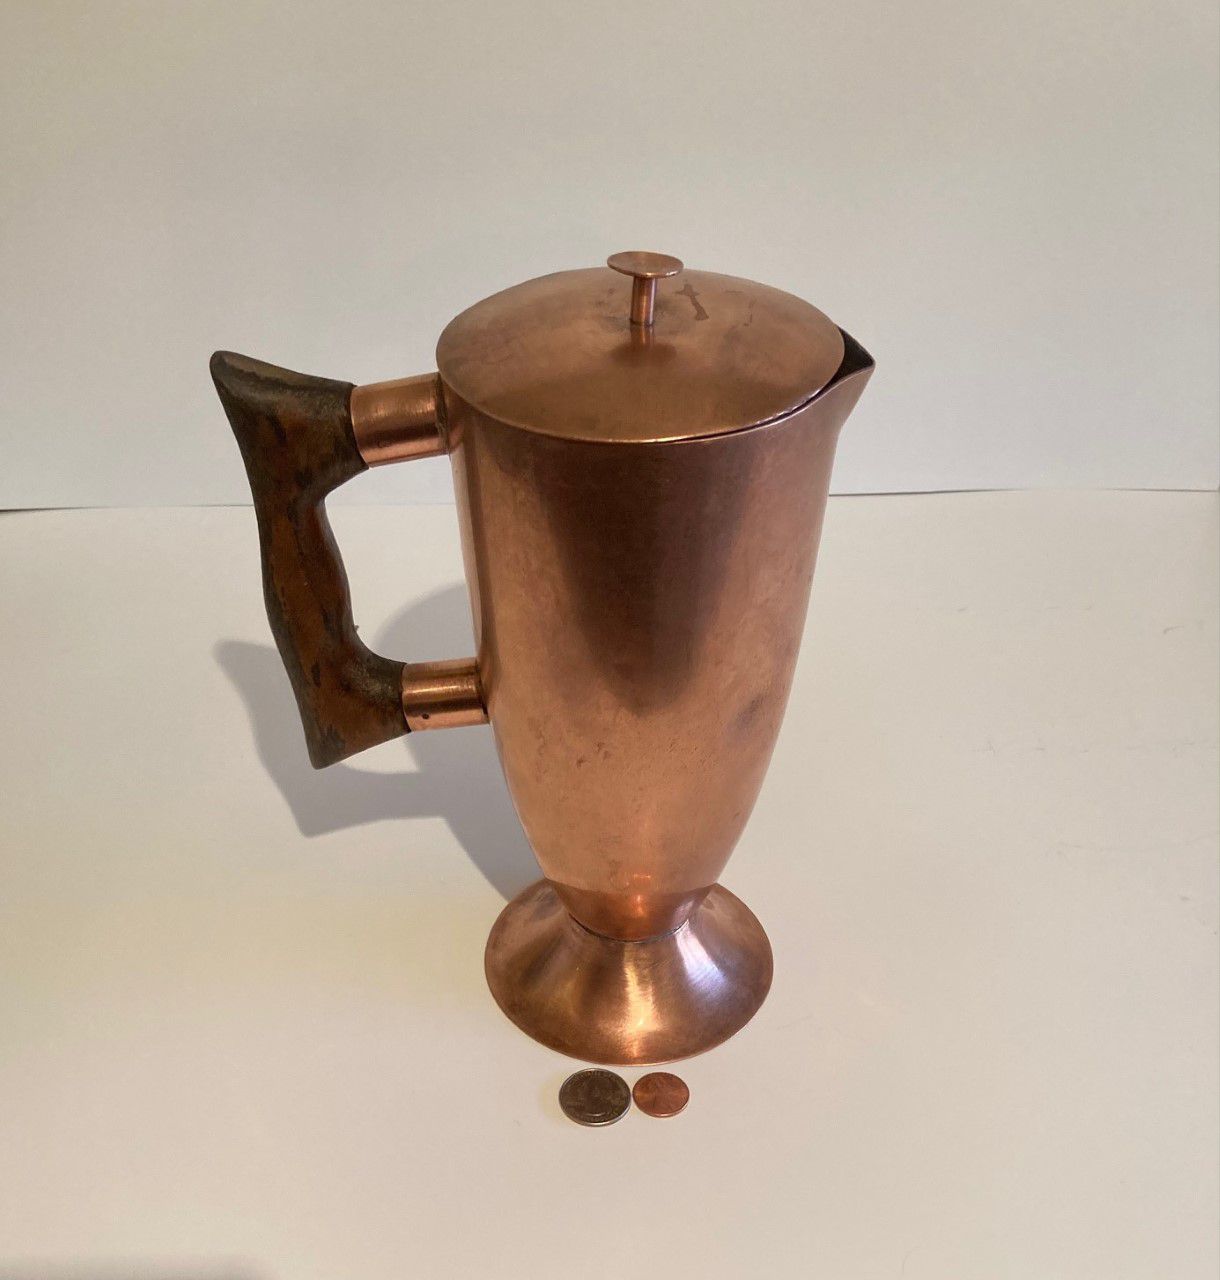 Vintage Metal Copper Serving Pitcher, Wooden Handle, 10" Tall, Kitchen Decor, Table Display, Shelf Display, This Can Be Shined Up Even More